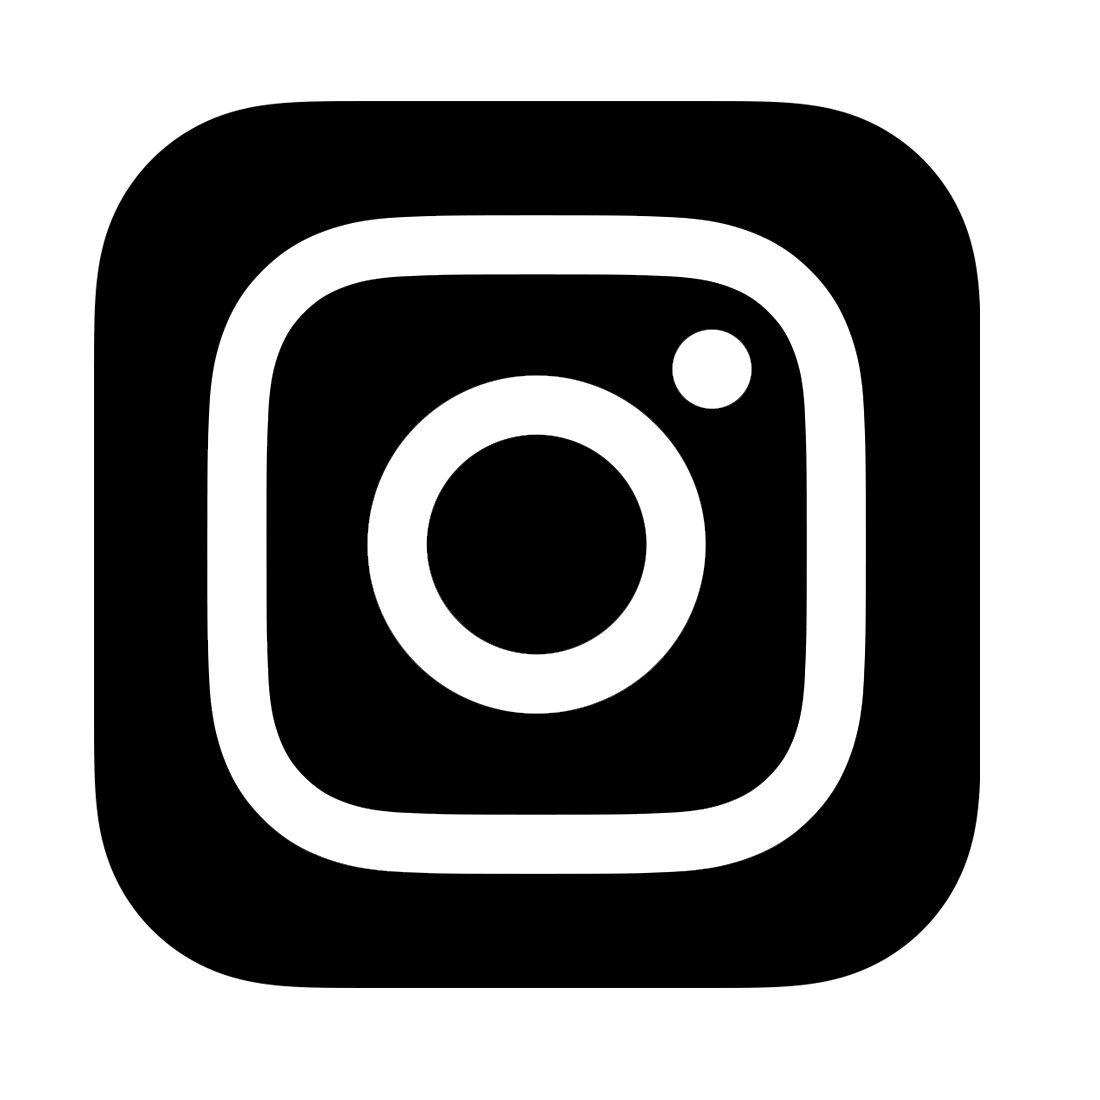 Fake Instagram Logo - Instagram Steps Up Its Crackdown On Fake Accounts, Likes, Follows